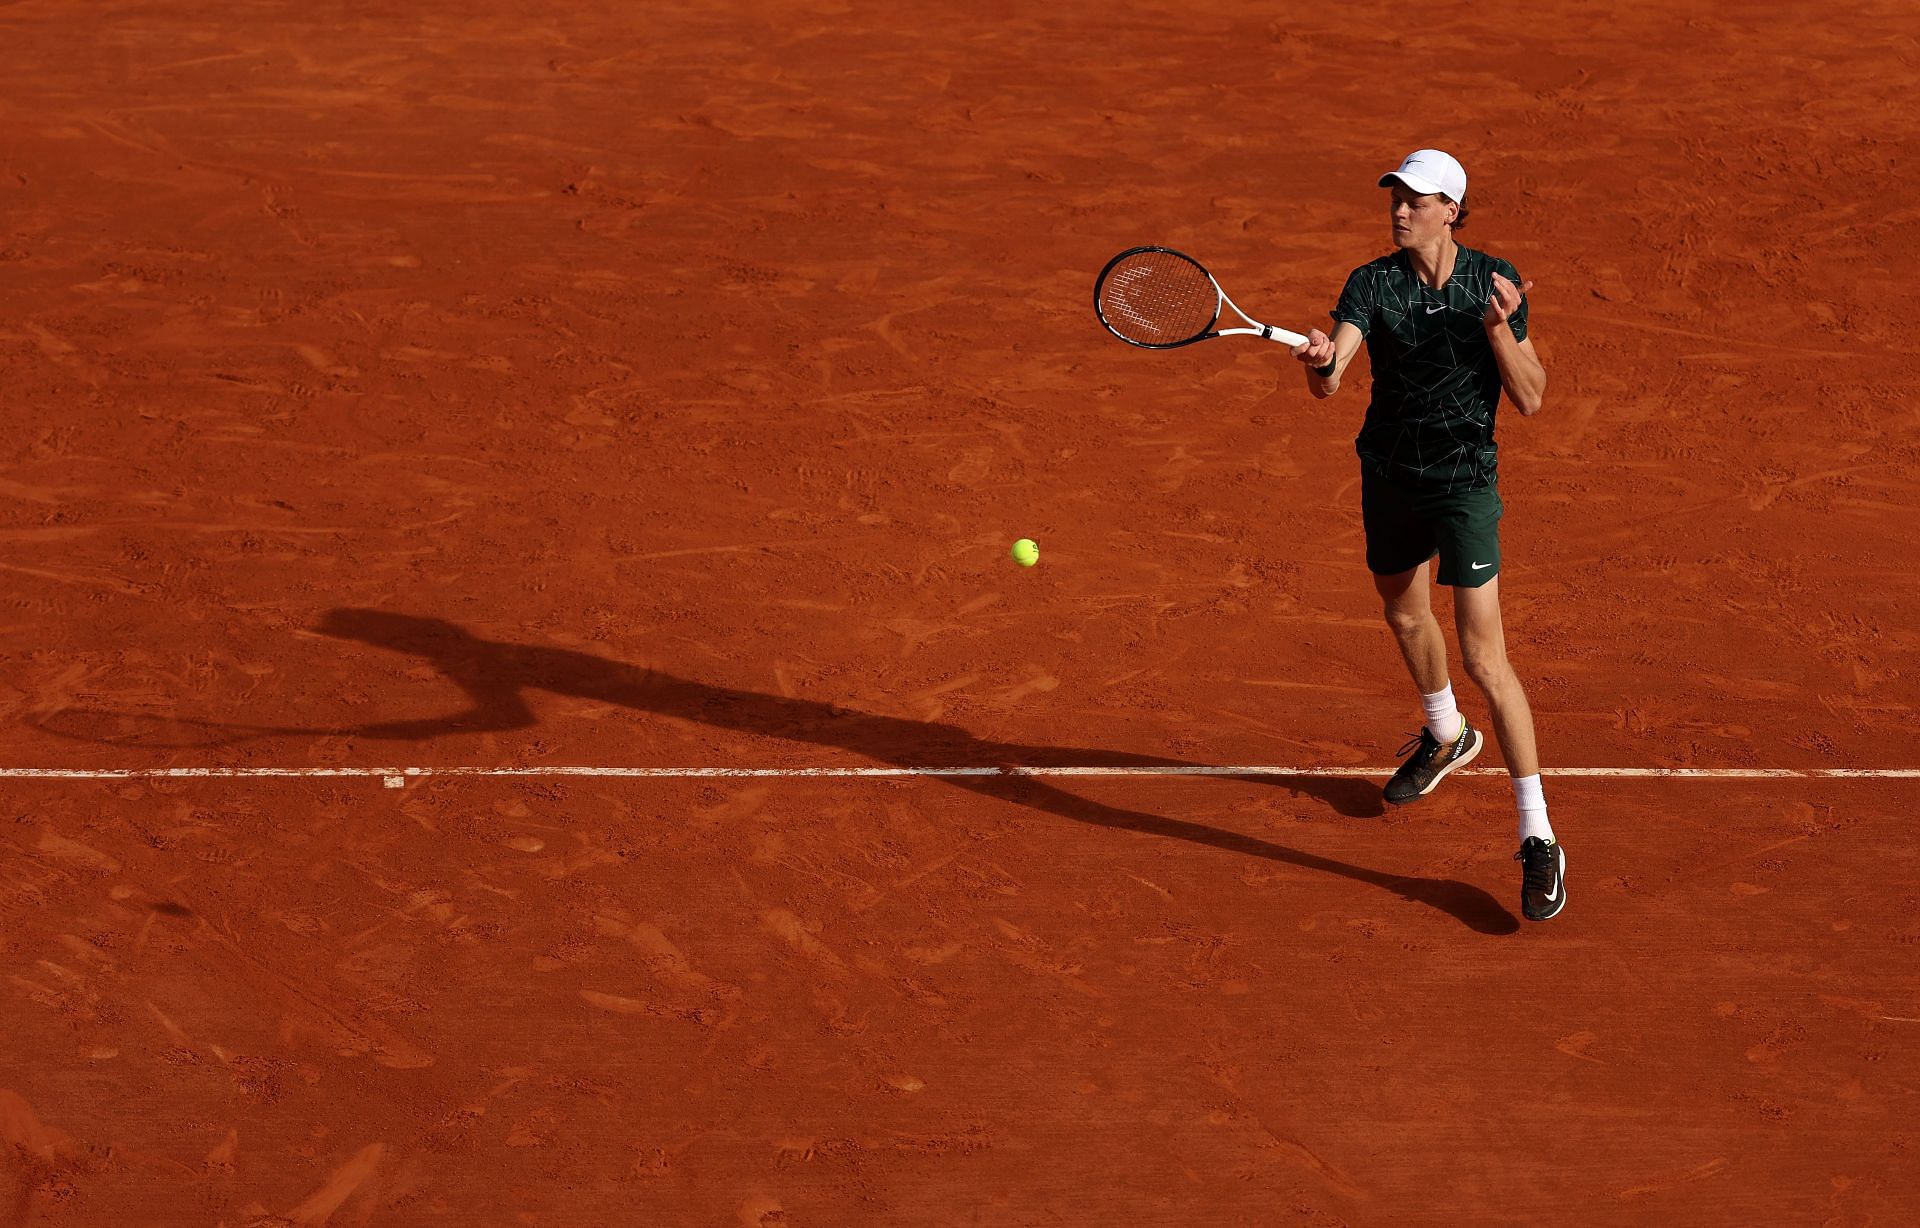 Sinner plays a forehand in his match against Coric in Monte-Carlo